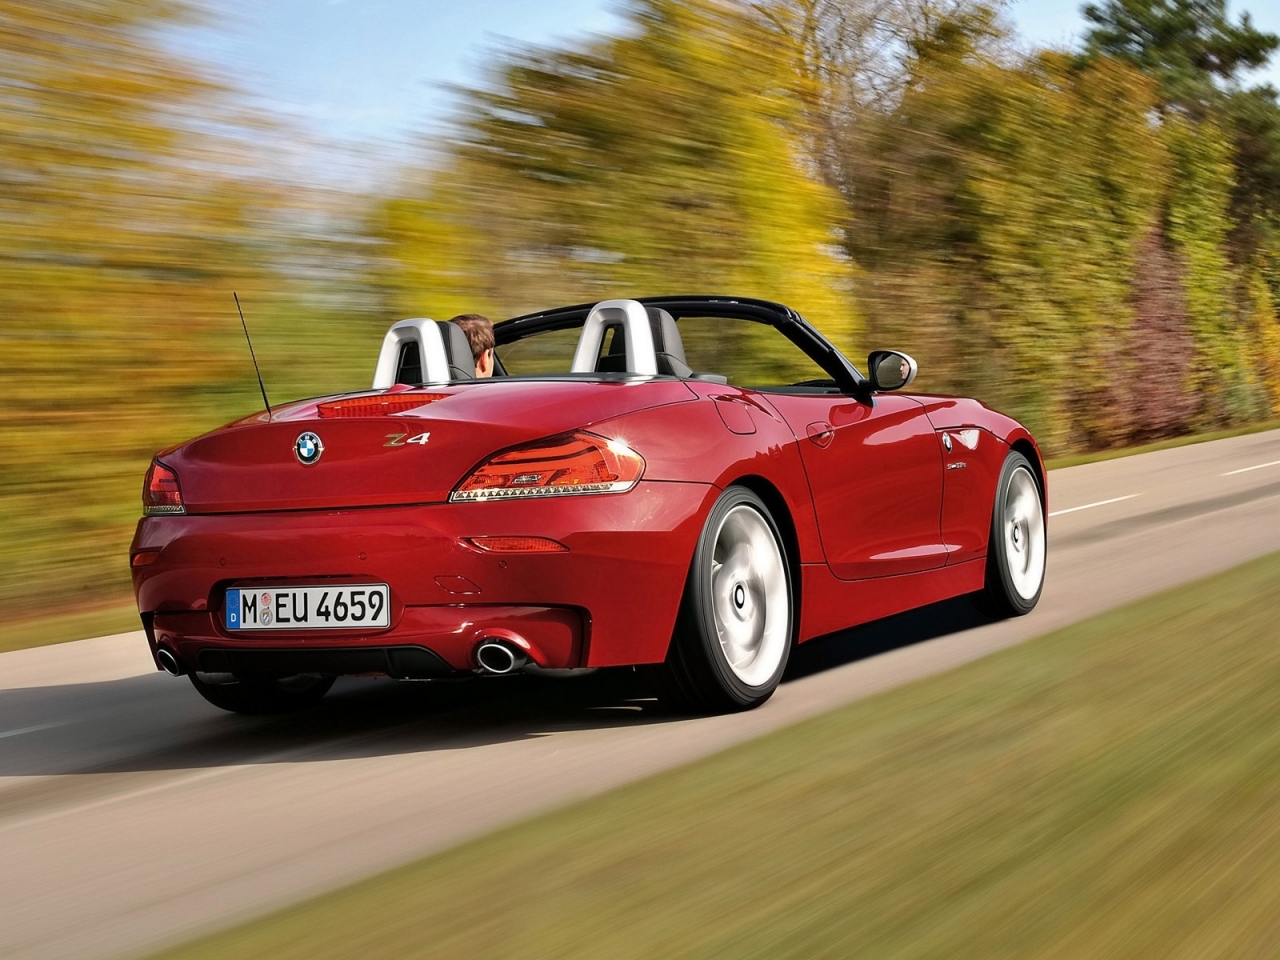 BMW Z4 sDrive35is Rear 2010 for 1280 x 960 resolution